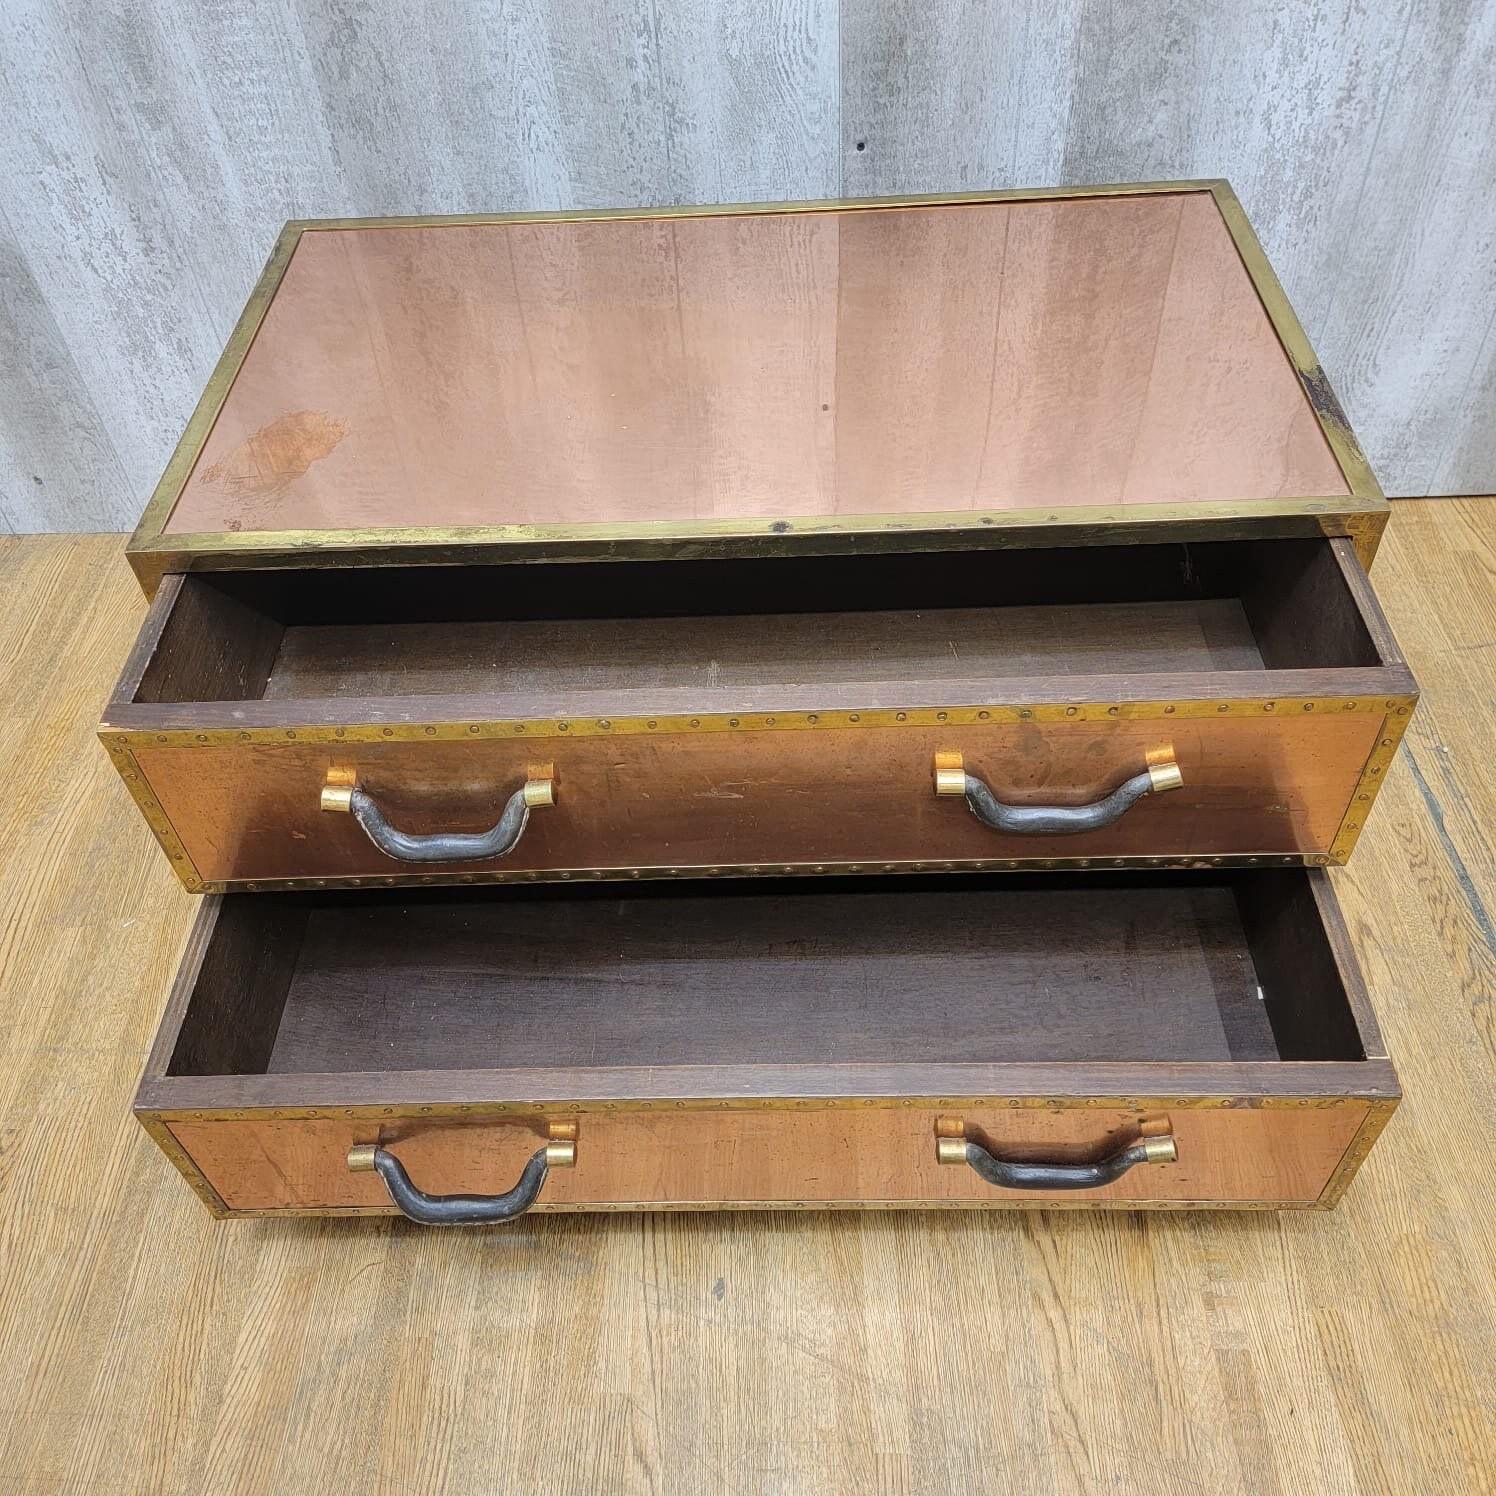 Unknown Vintage Copper Trunk Style Coffee Table with Leather Handles